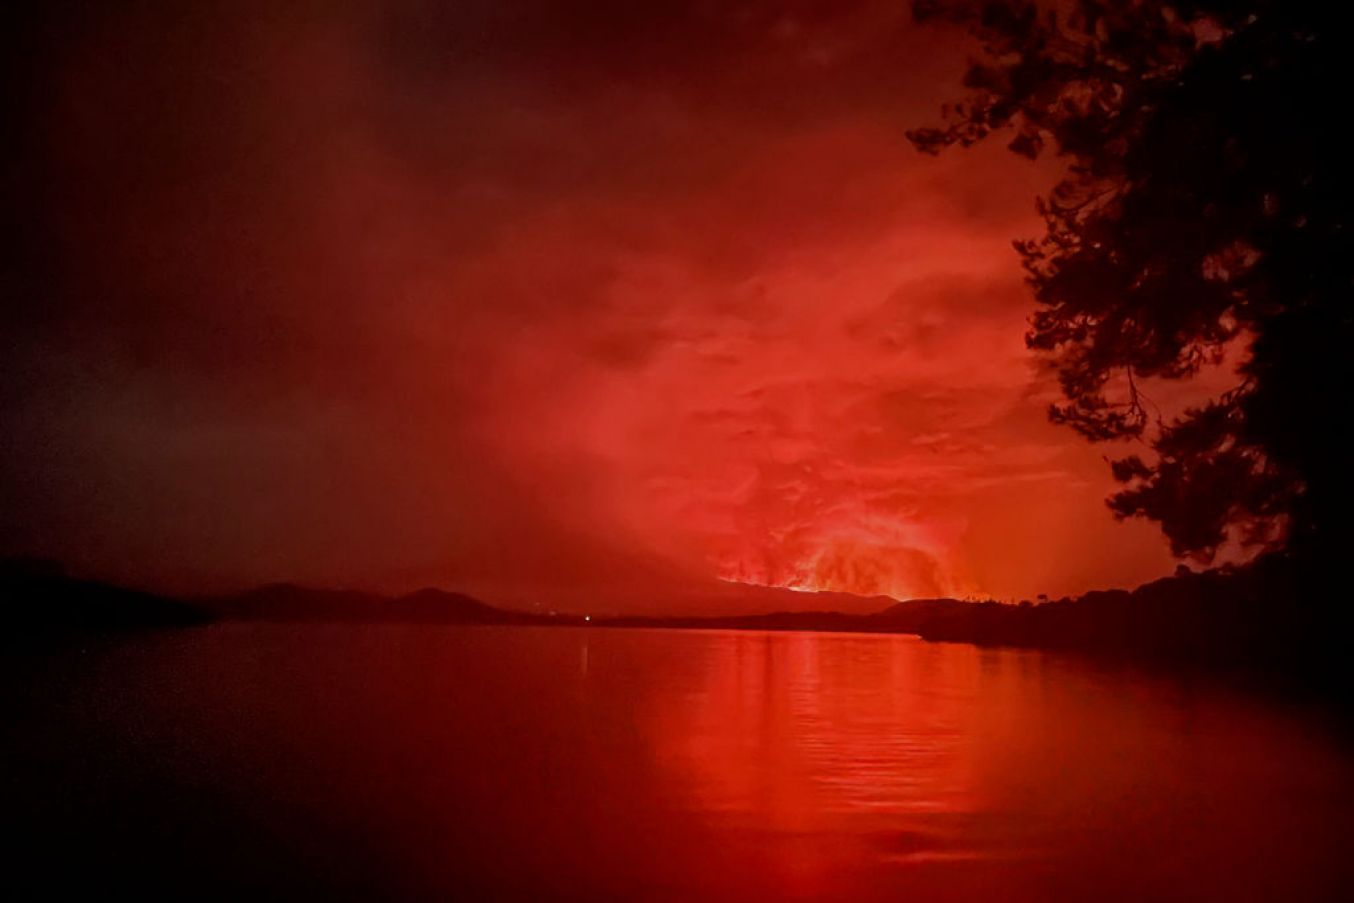 Lake Kivu In The East Of The Democratic Republic Of Congo As Flames Spew From The Nyiragongo Volcano. Photo: Alex Miles/Afp Via Getty Images